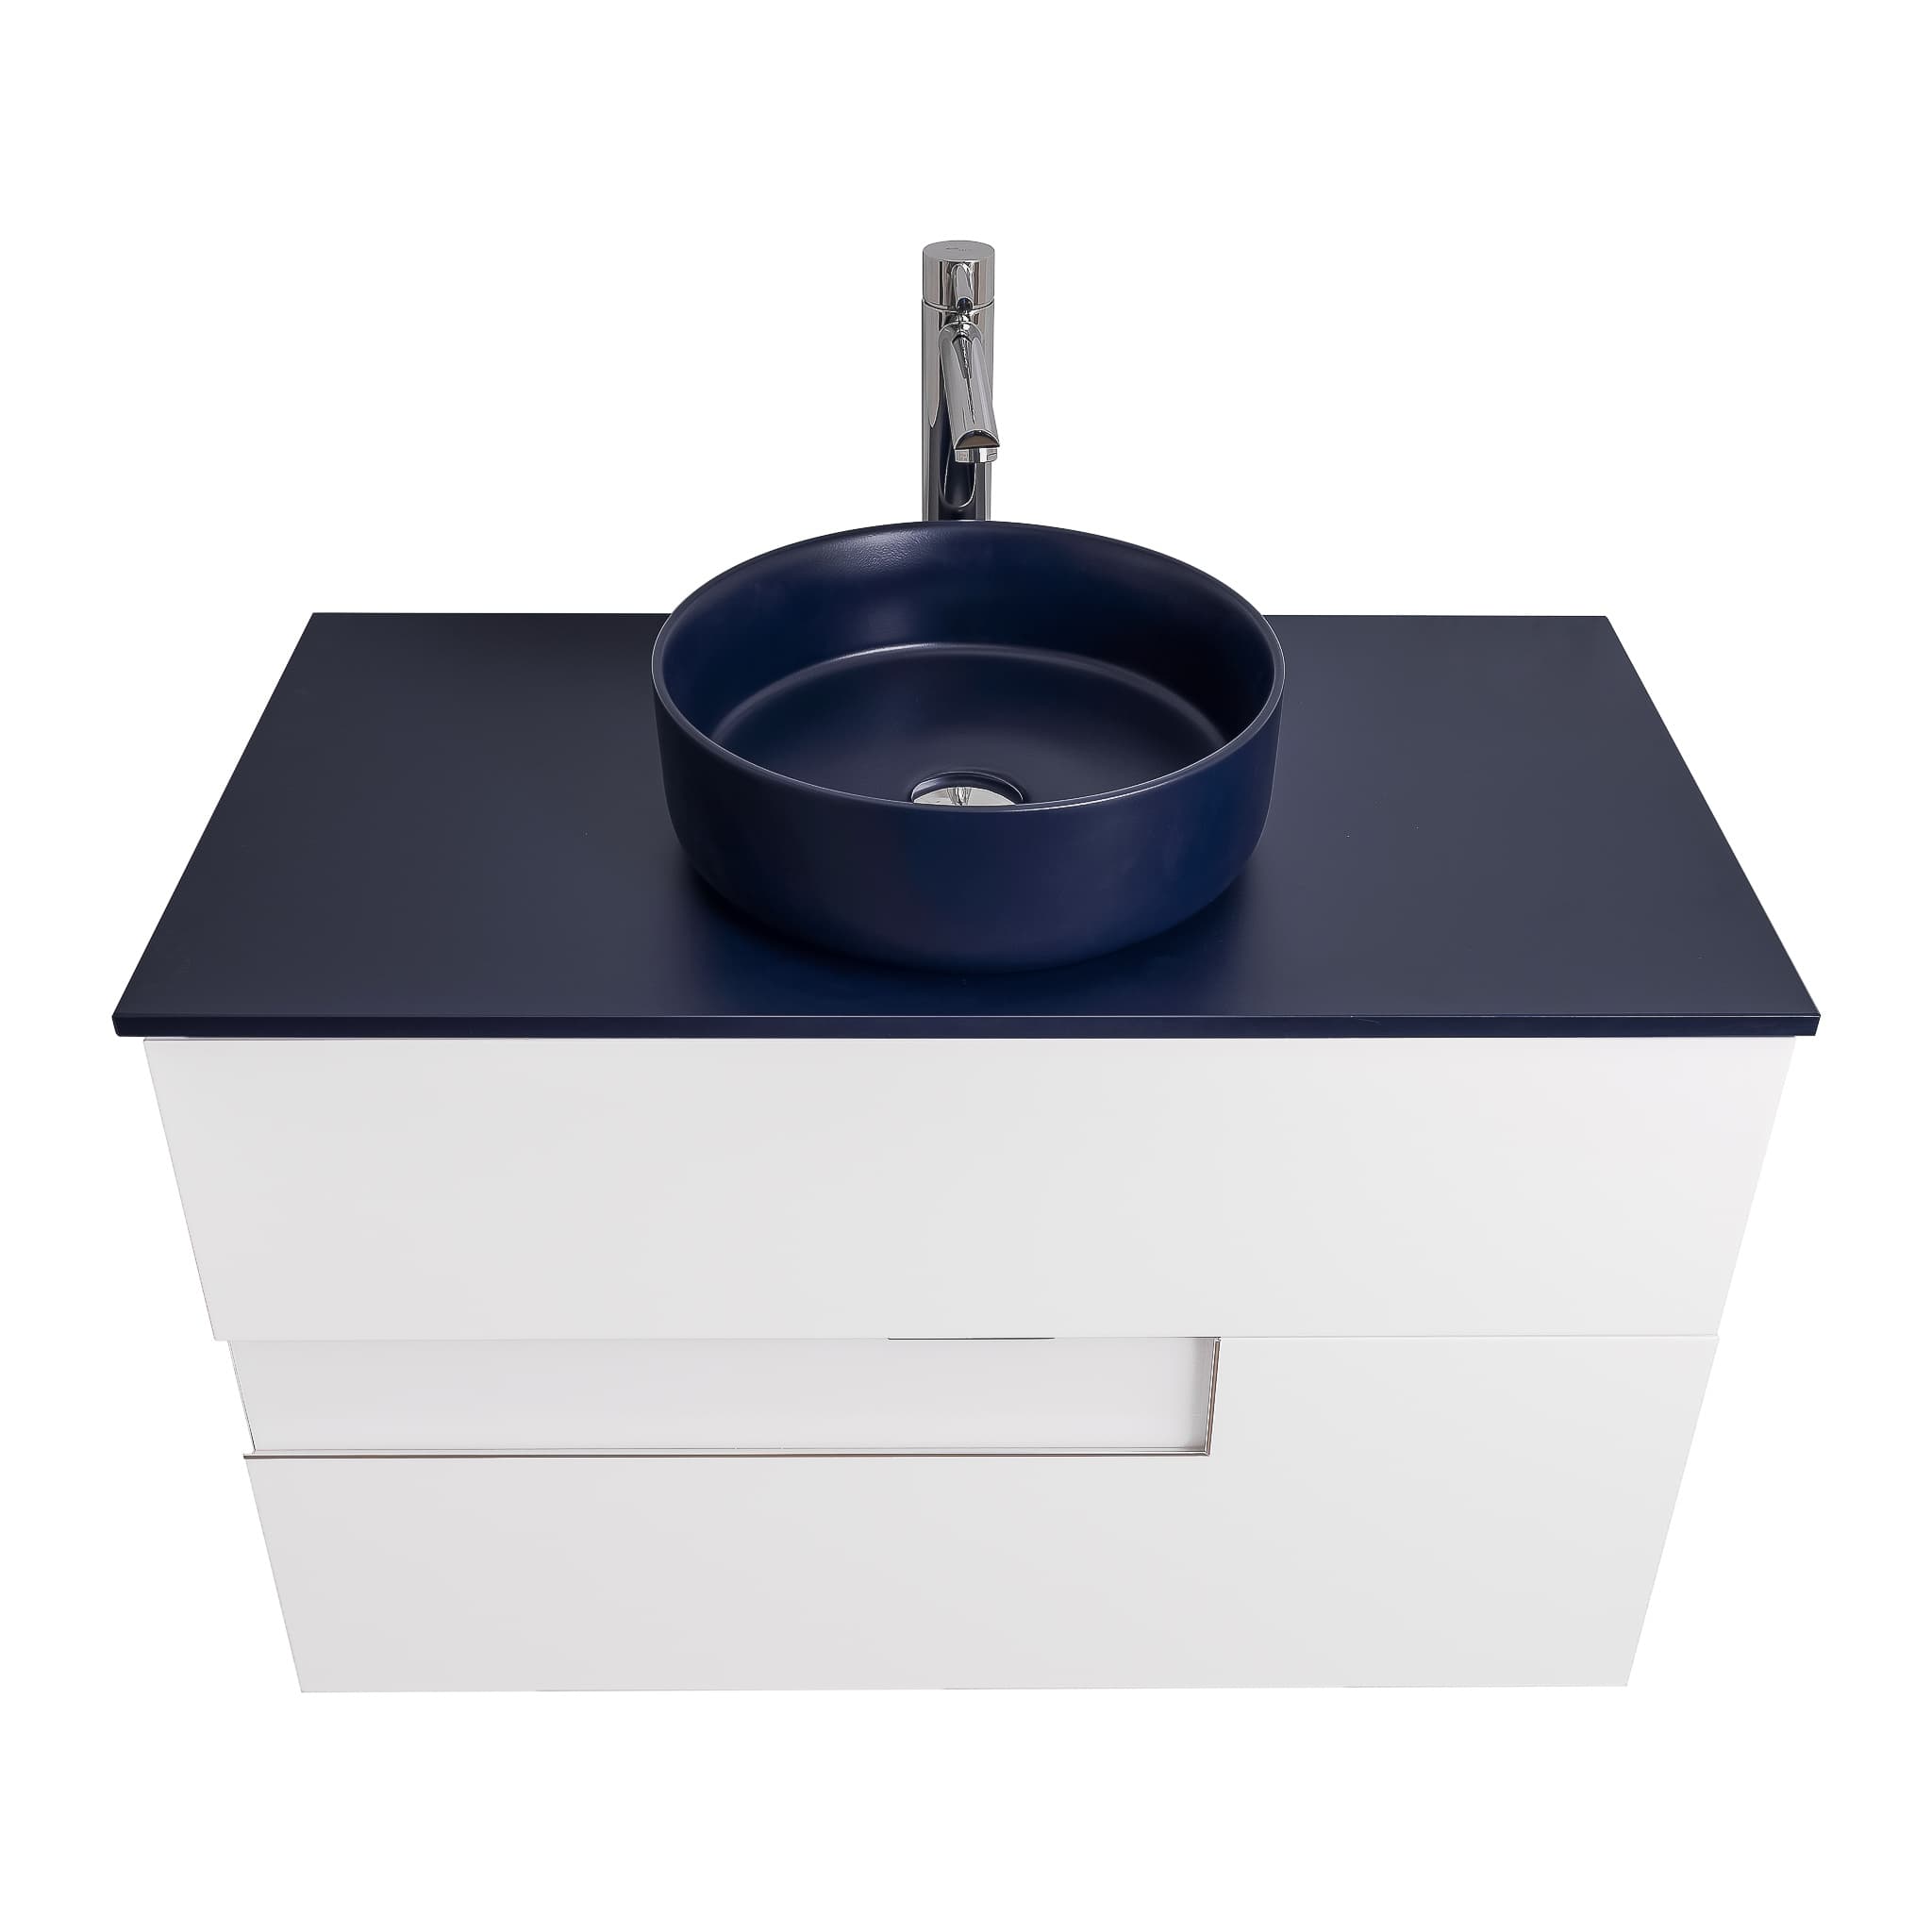 Vision 39.5 White High Gloss Cabinet, Ares Navy Blue Top And Ares Navy Blue Ceramic Basin, Wall Mounted Modern Vanity Set